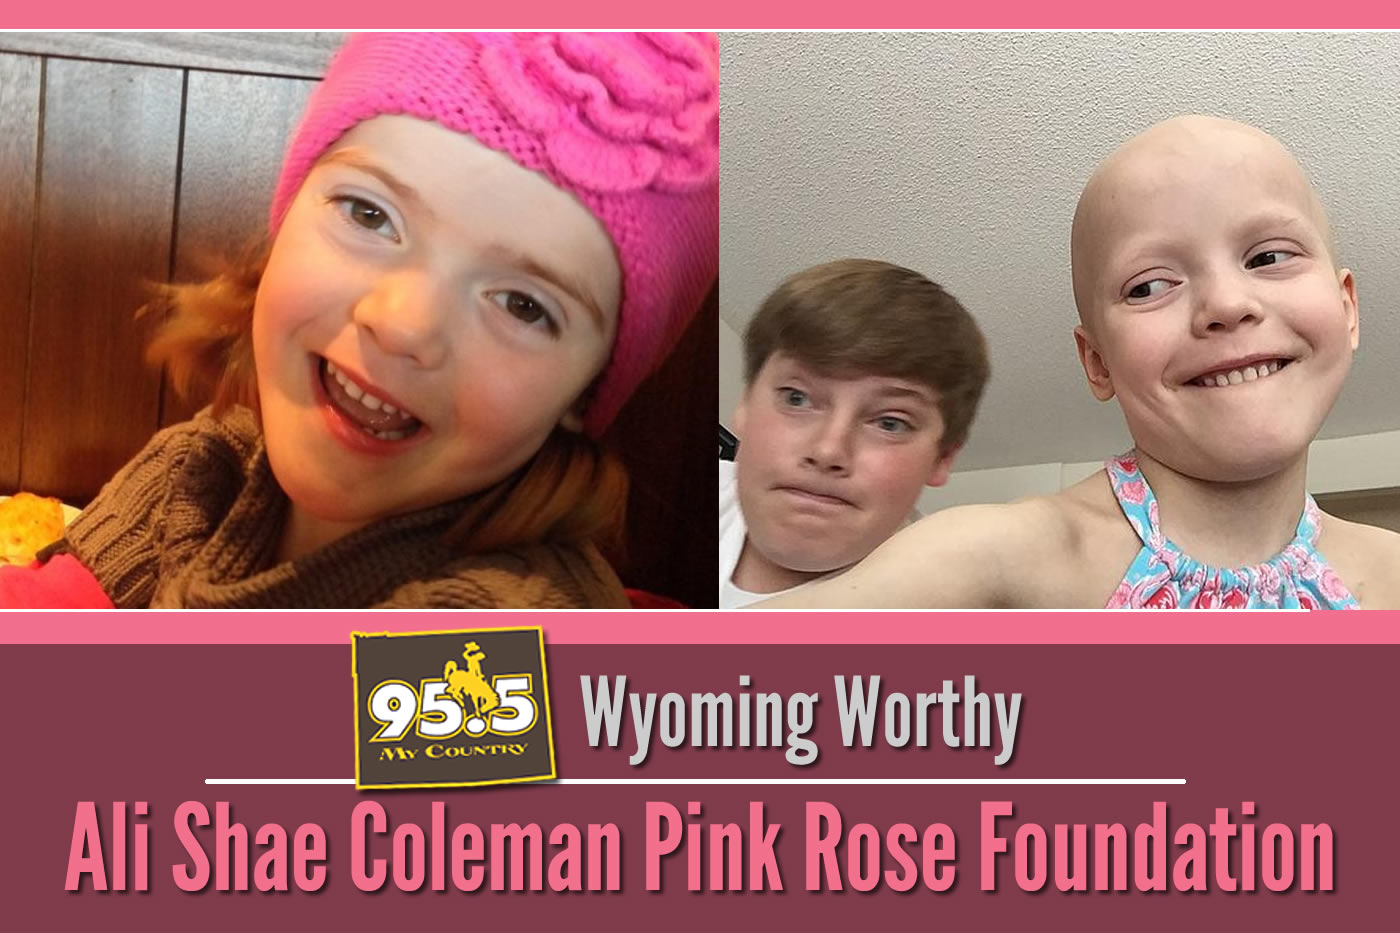 The Pink Rose Foundation featured on My Country 95.5